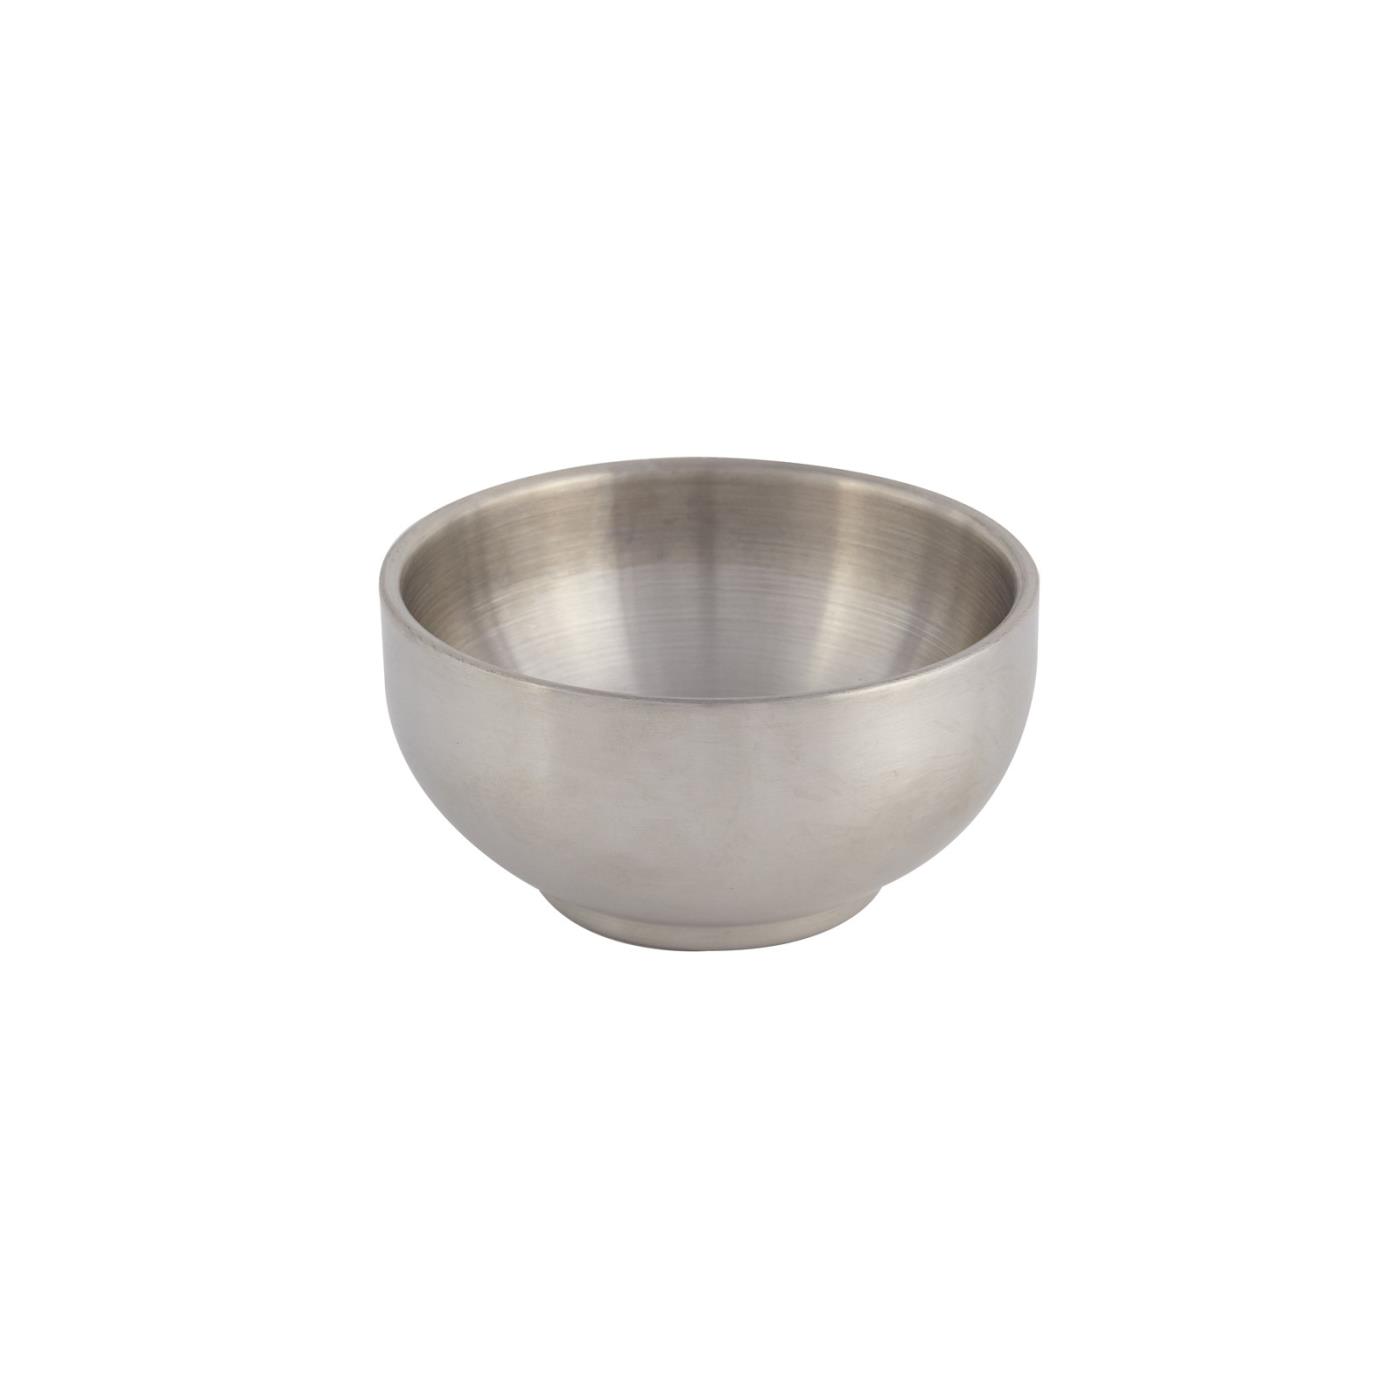 Stainless Steel Harmony Bowl - 3.5"